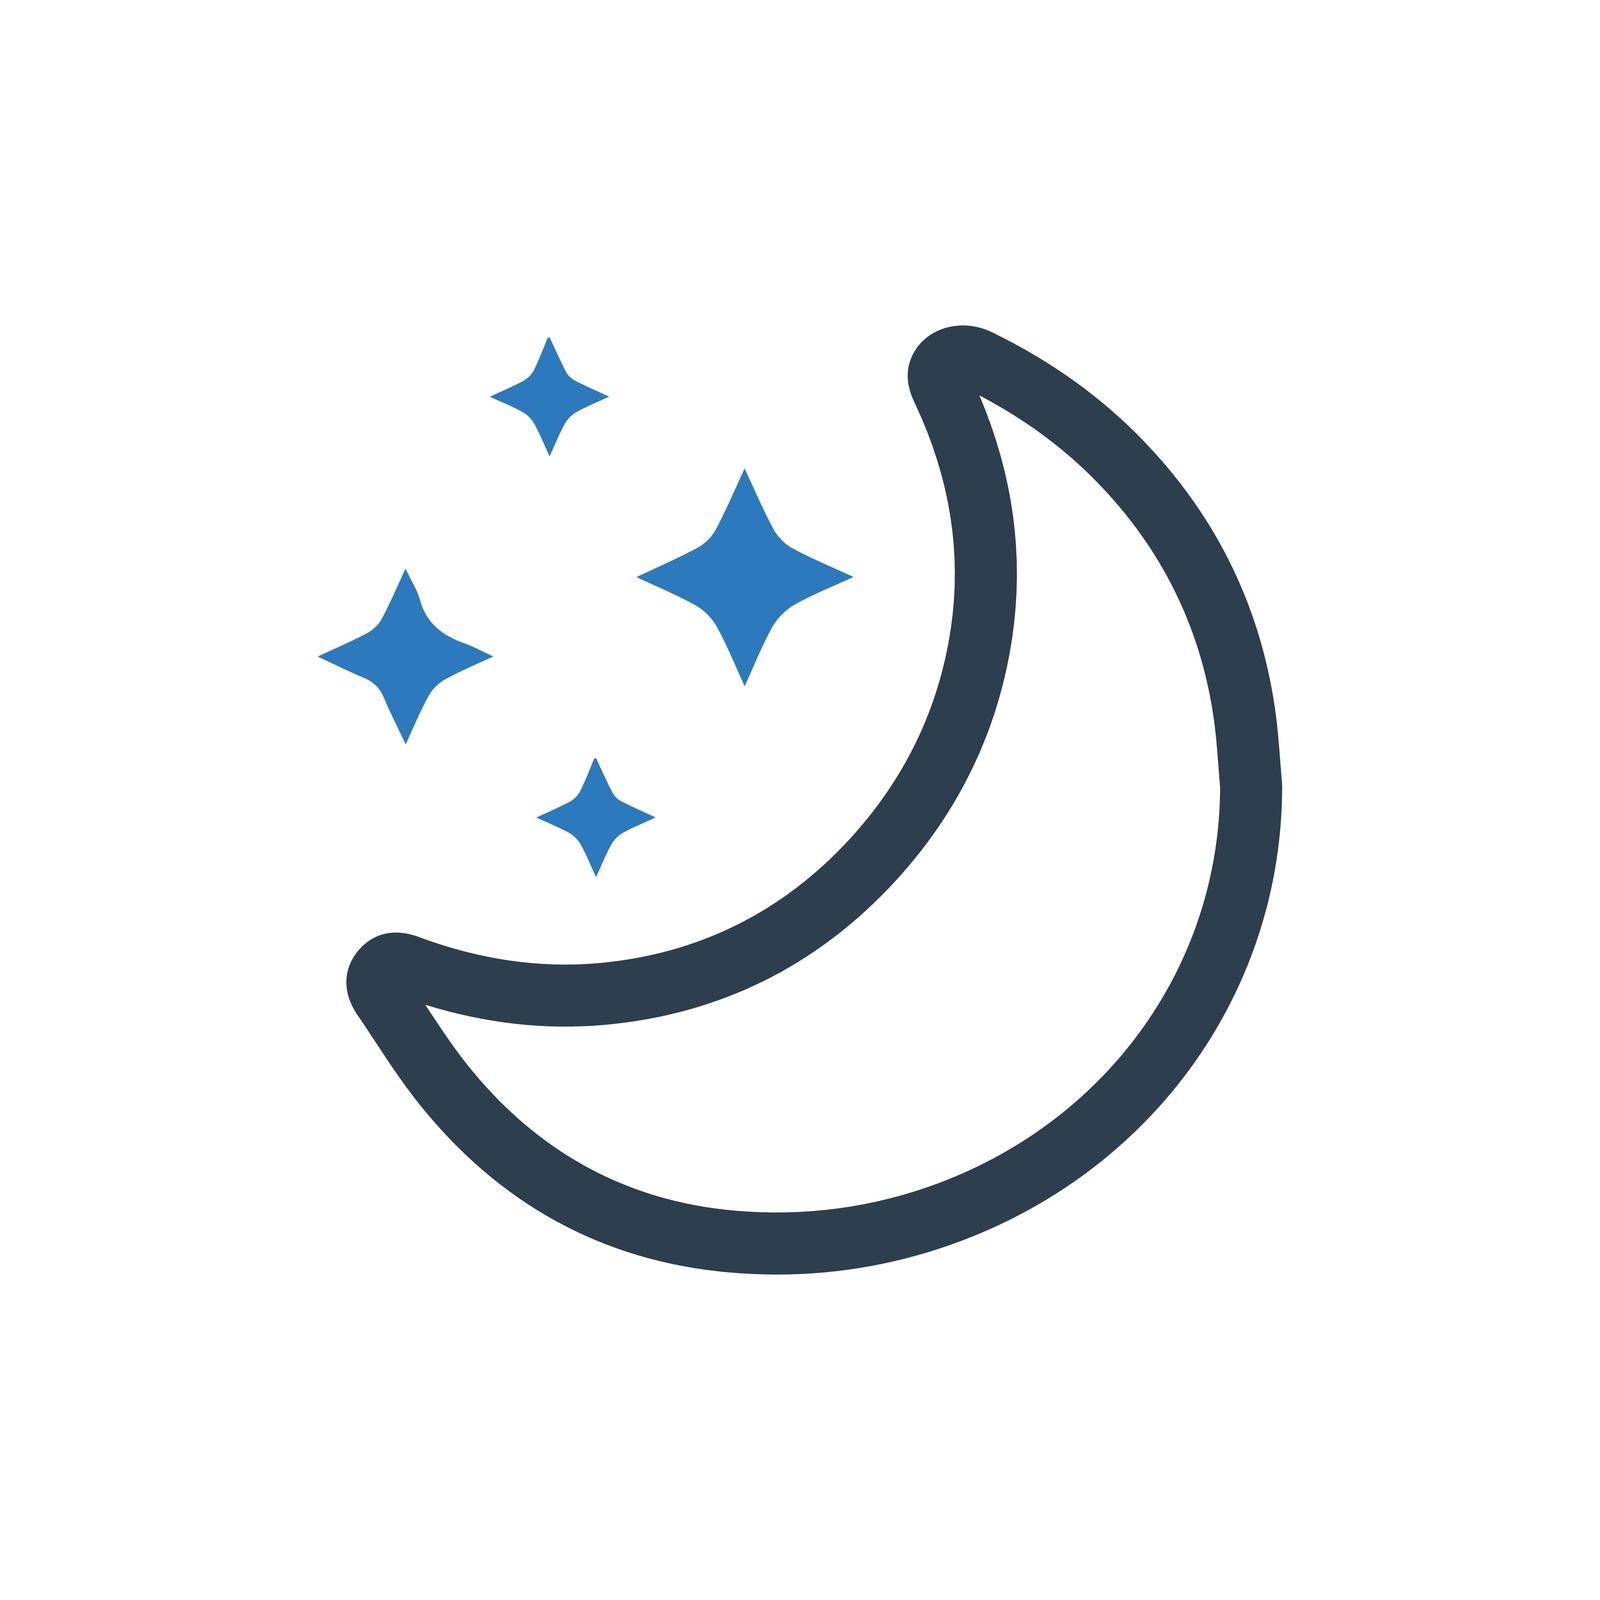 Moonlight icon. Meticulously designed vector EPS file.